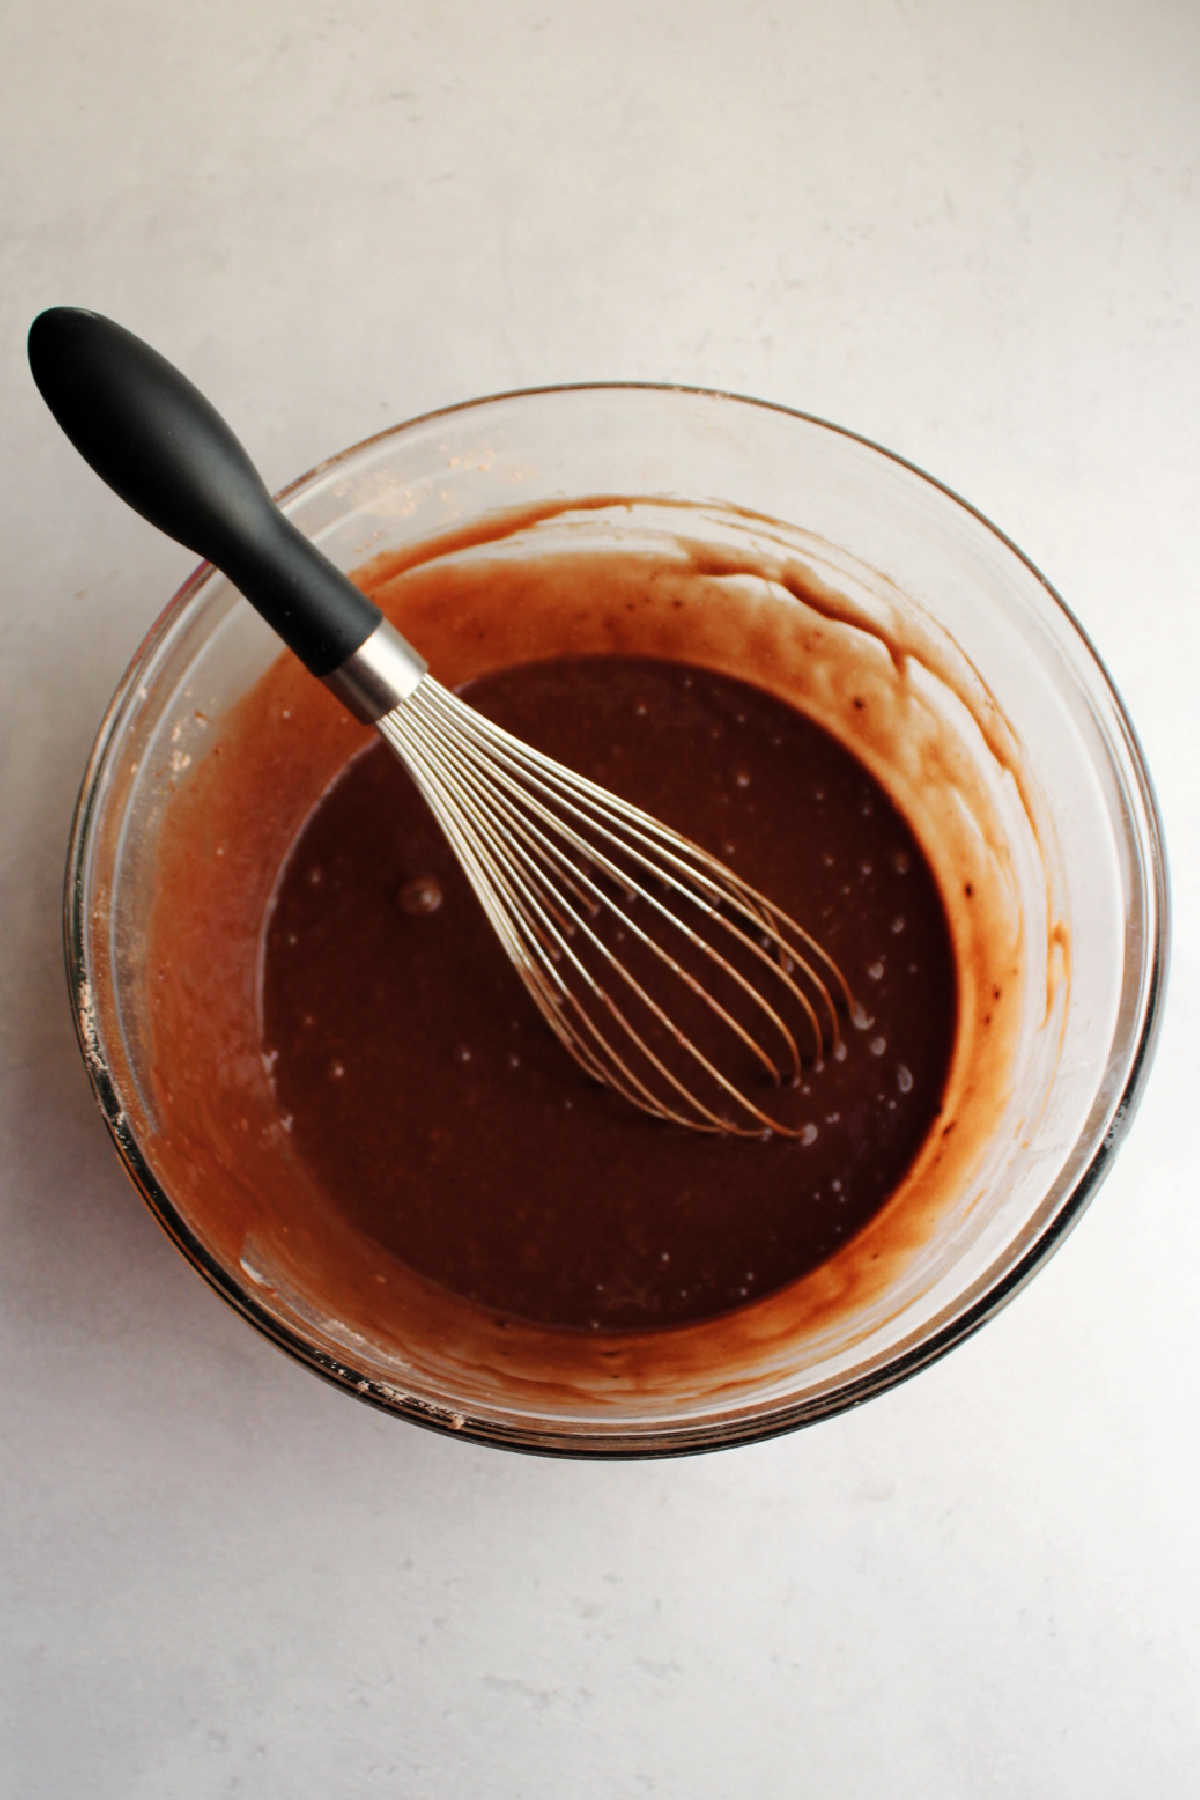 Mixing bowl with chocolate cake batter and whisk.